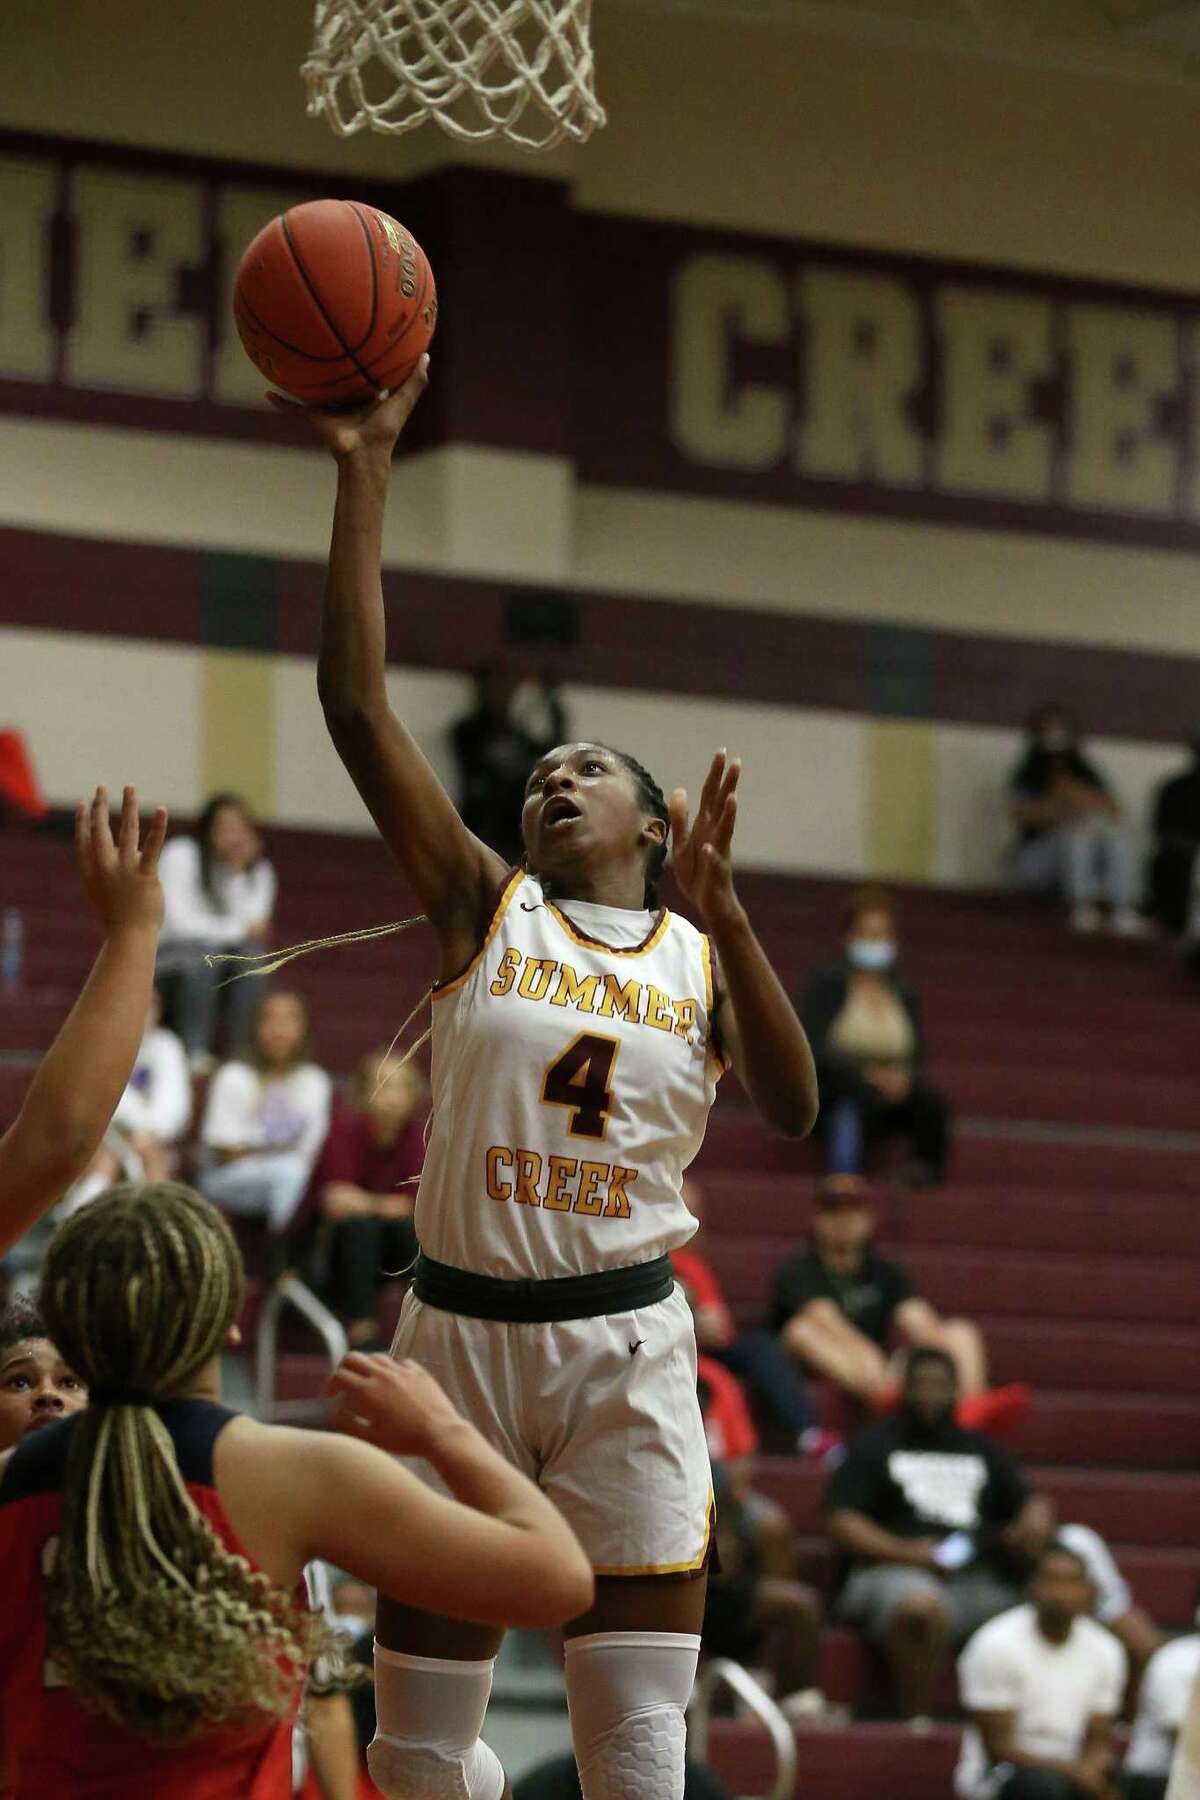 Summer Creek Bulldogs forward Kaitlyn Duhon #4 shoots the ball during the first half of the high school basketball game between the Summer Creek Bulldogs and the Atascocita Eagles at Summer Creek High School in Houston, TX on Friday, December 17, 2021.